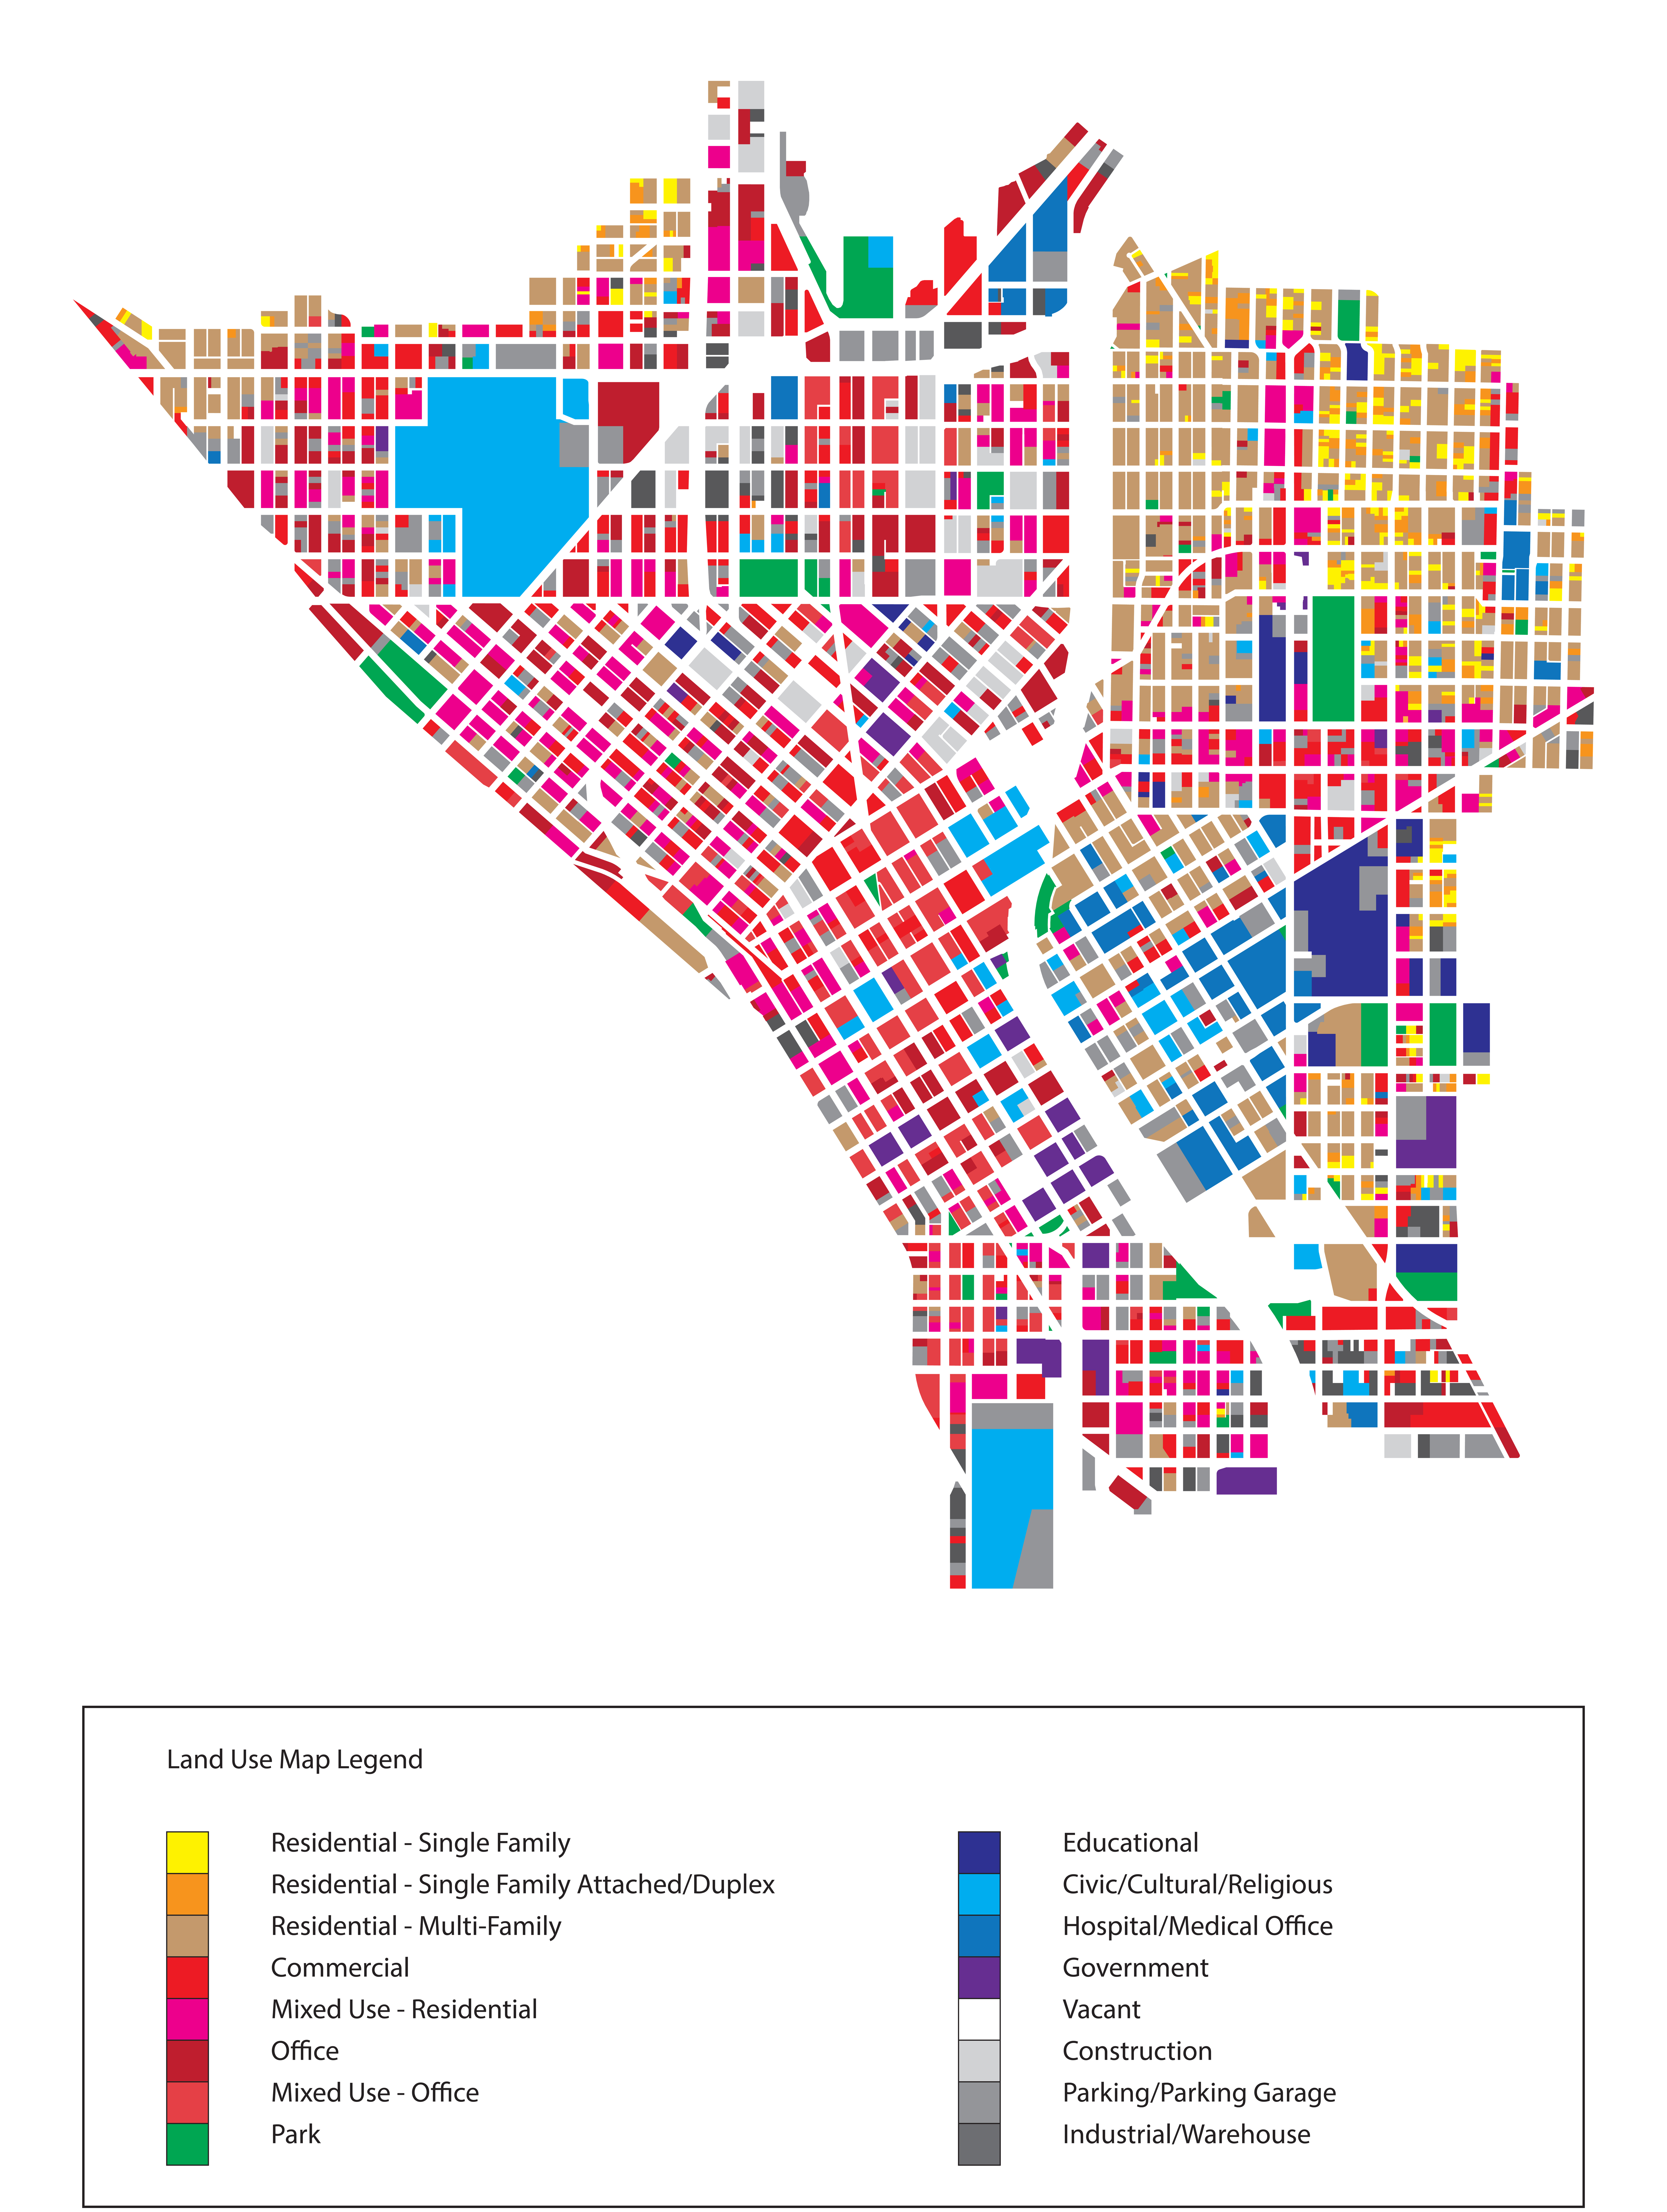 Figure 3. Land use map of the urban core of Seattle. Source: Author